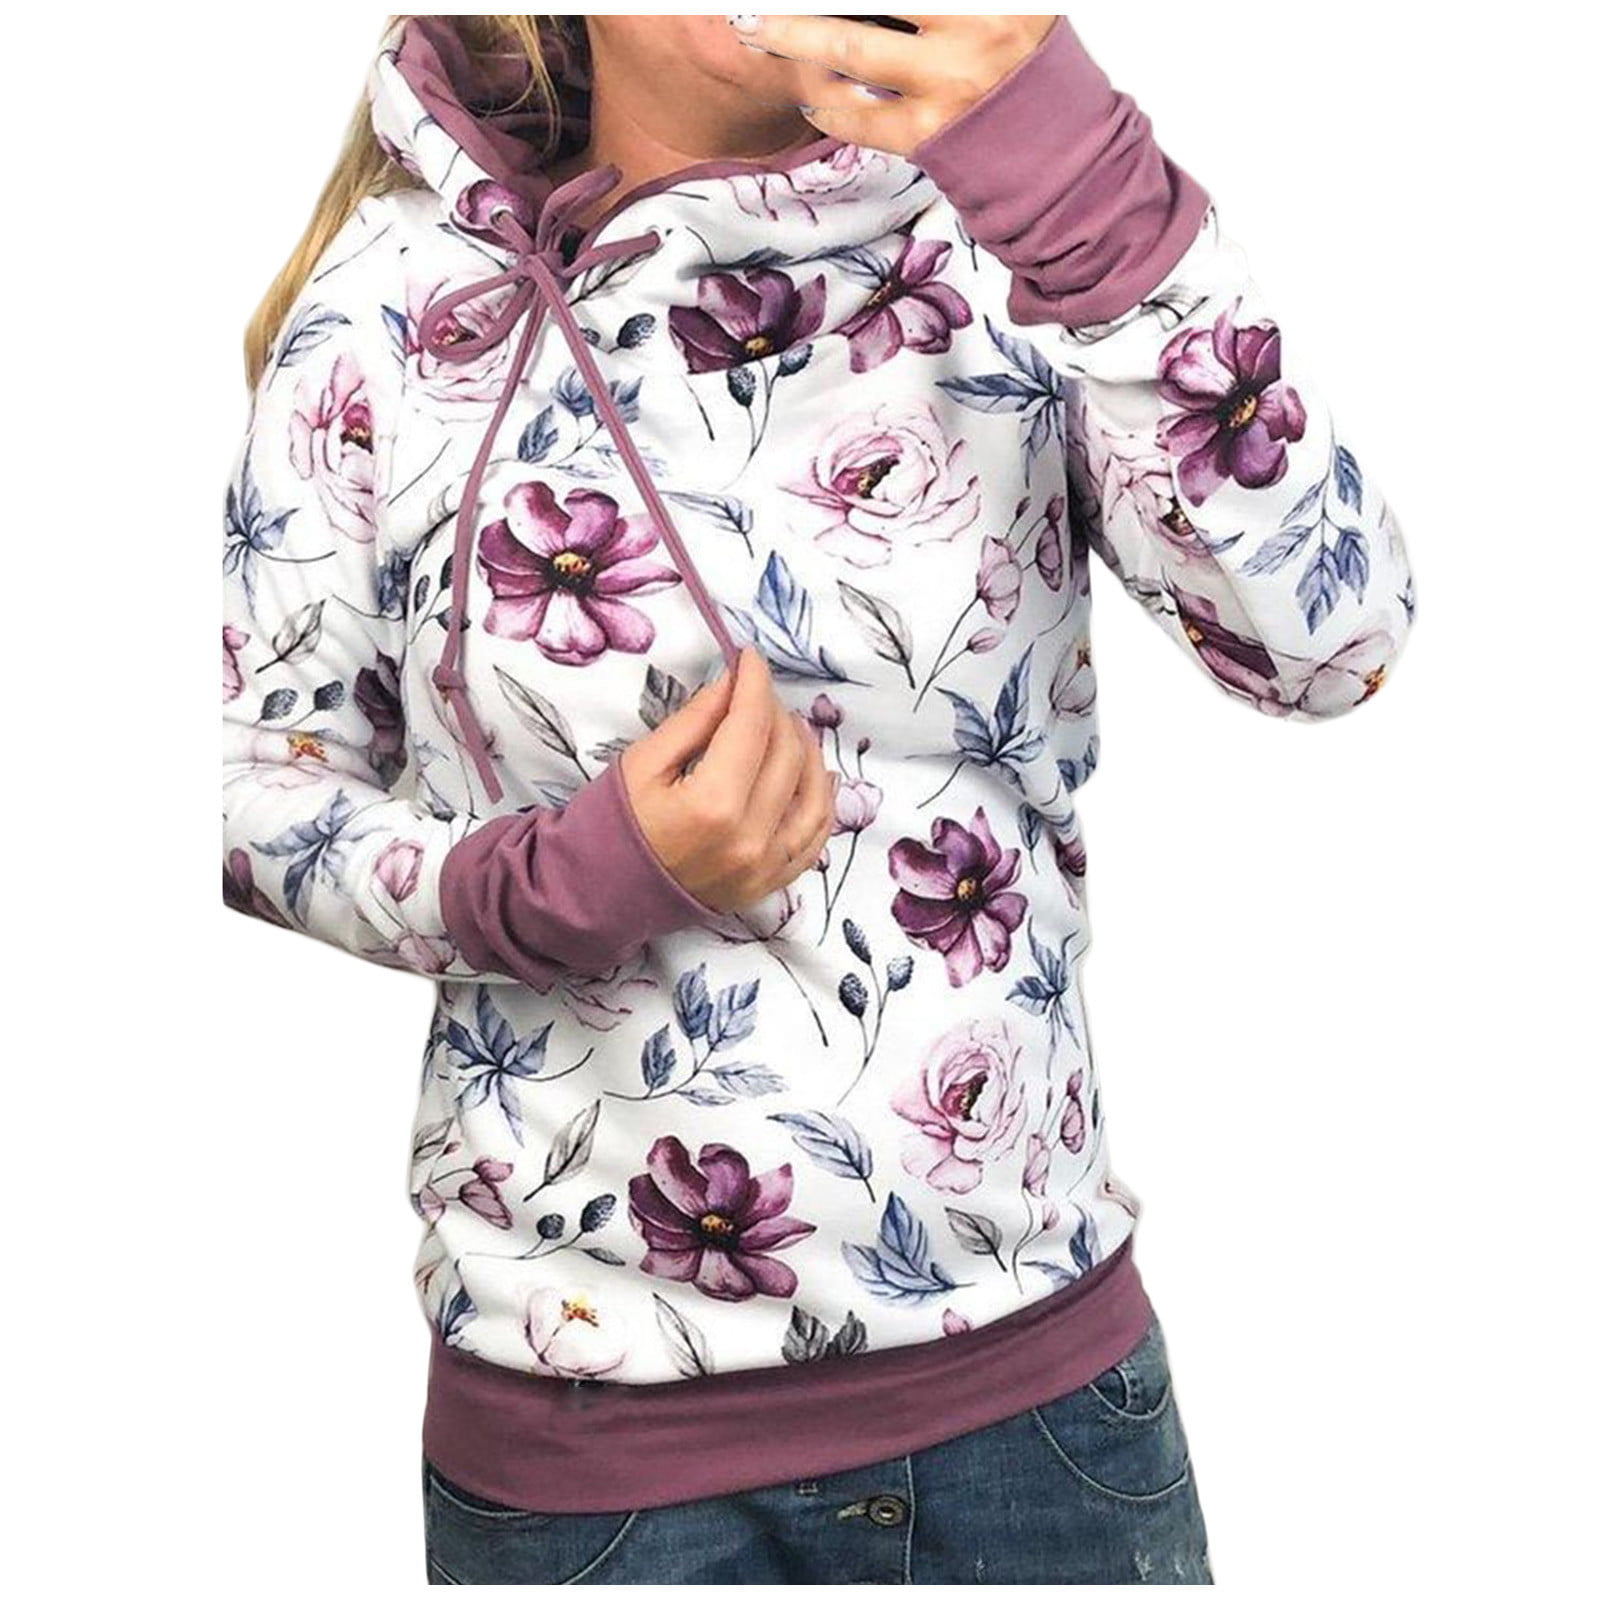 Womens Tops Sexy Crop Floral Stripe Printed Splicing Workout Outwears Long Sleeve V-Neck Hoodies Sweatershirt Casual Fall Blouse Tops Pink Tops Long Sleeve Going Out Tops For Women Dressy Tops For